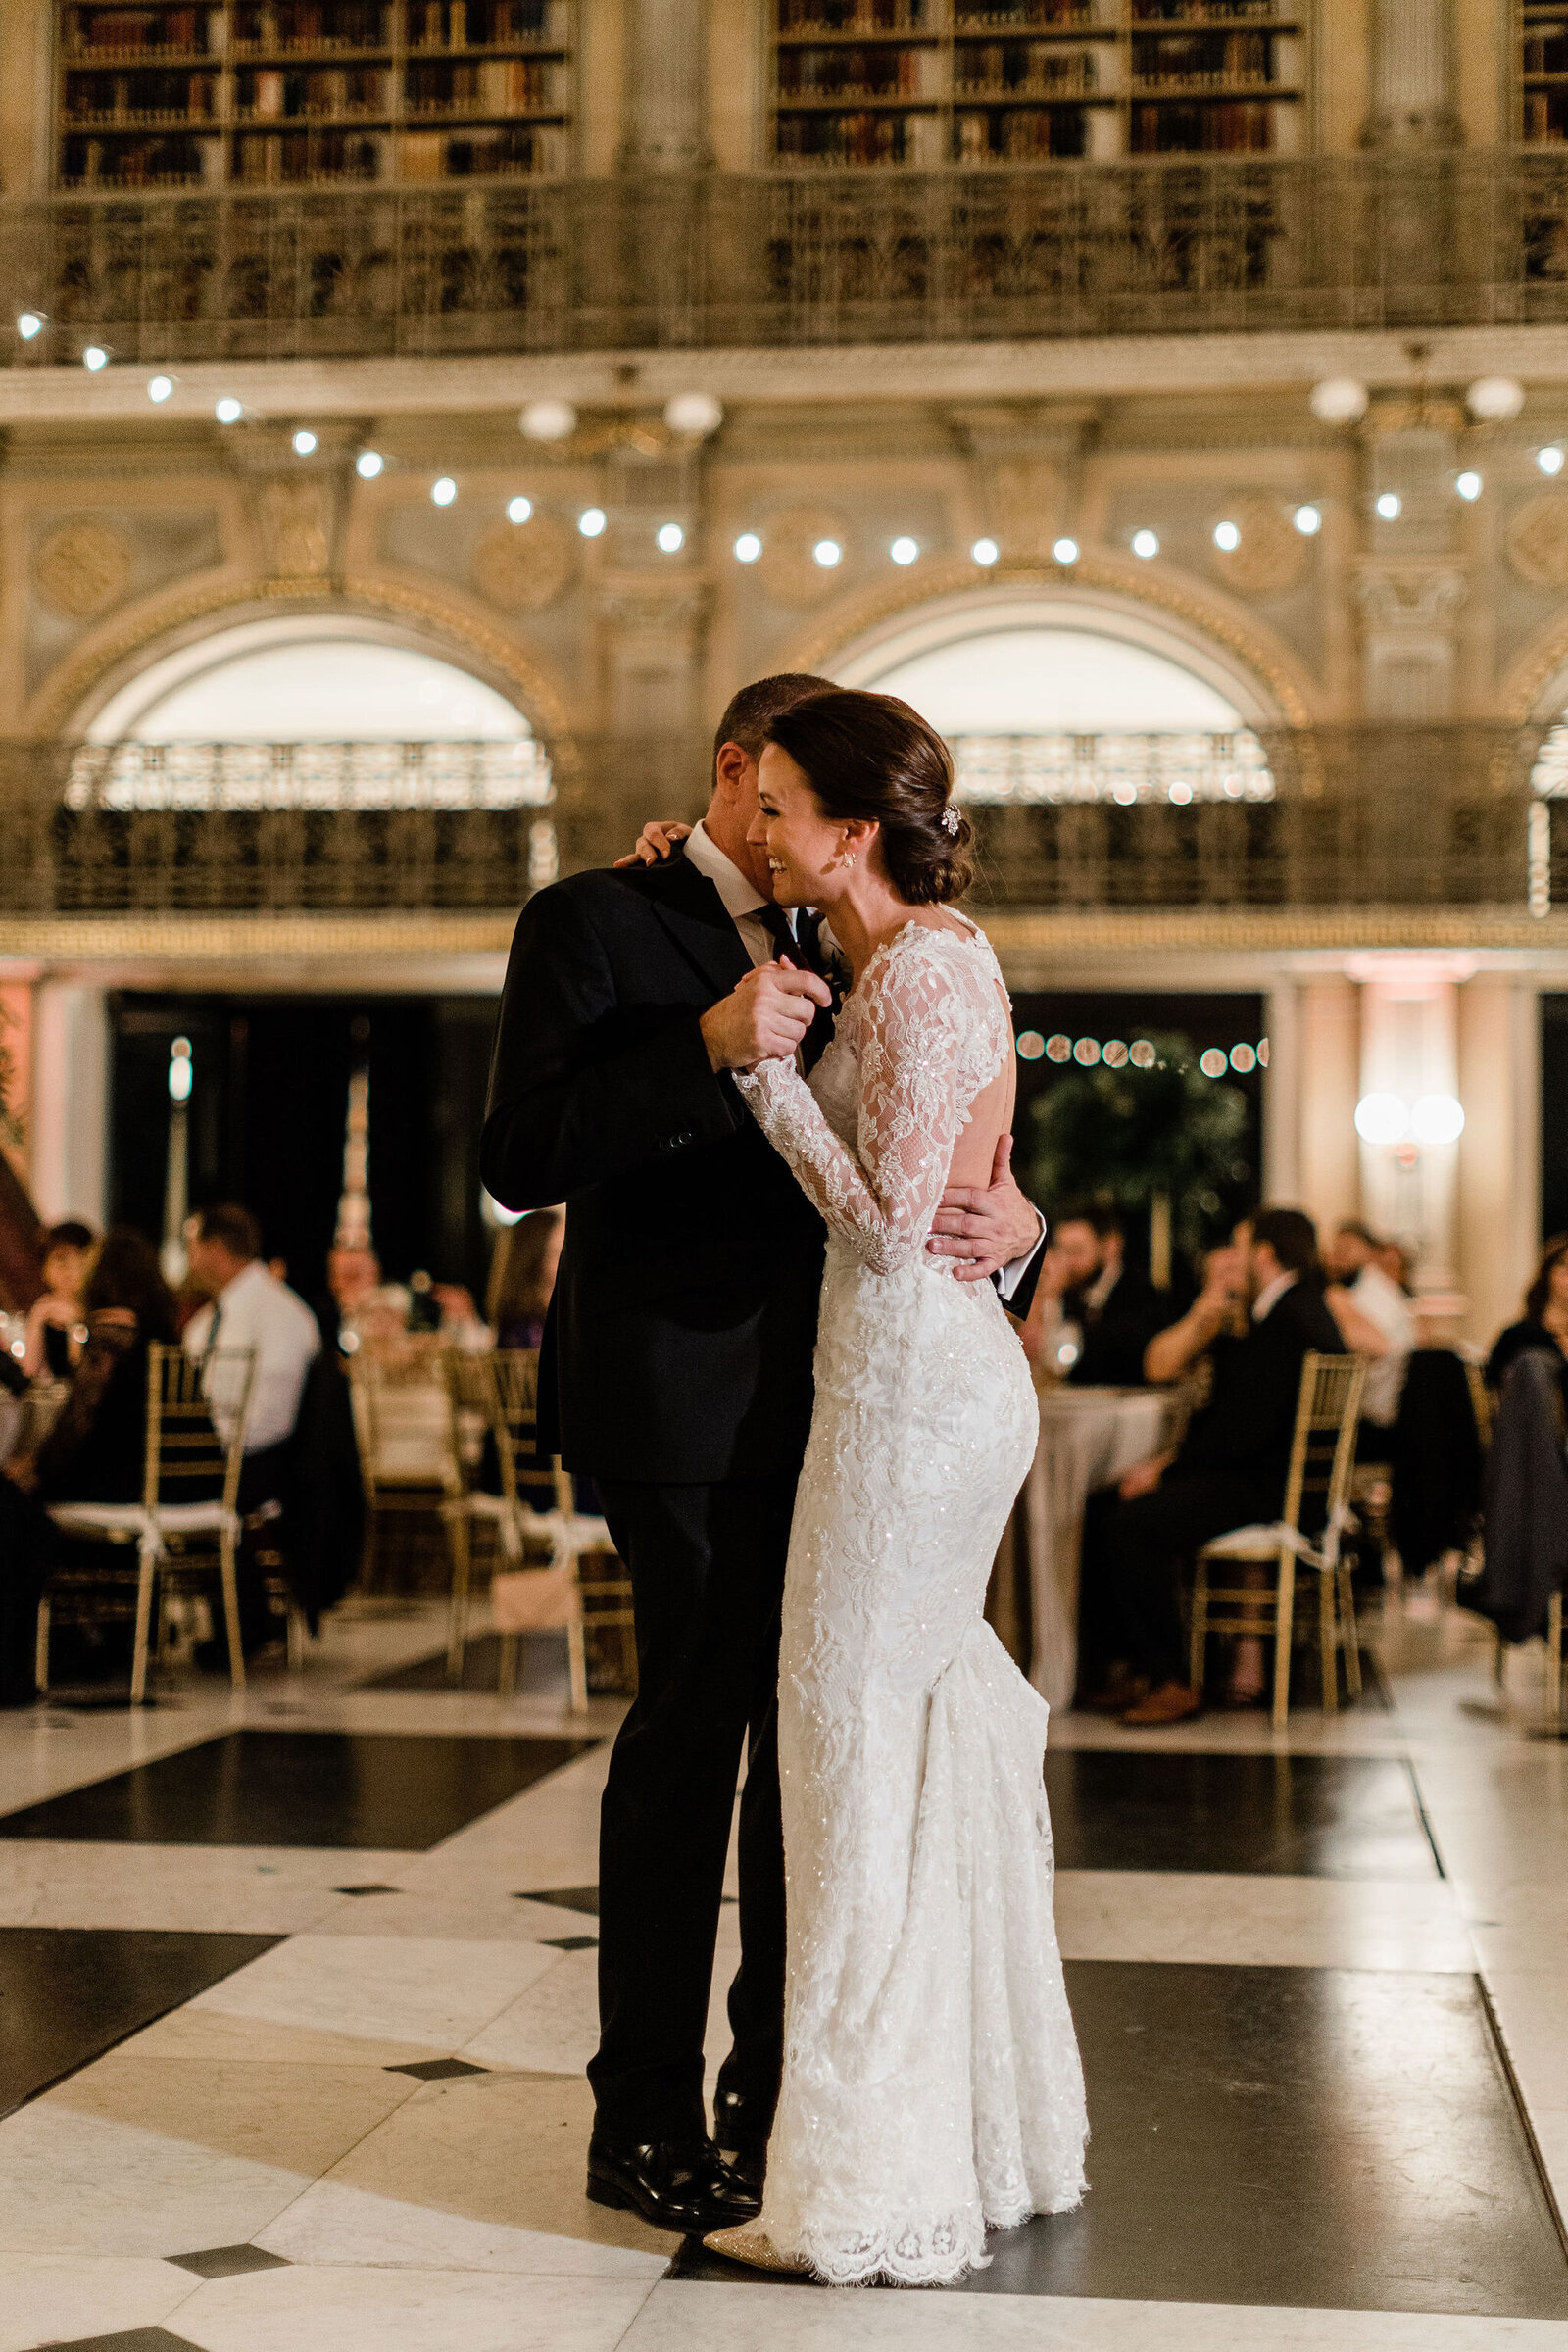 Father Daughter Dance | The Peabody Library Baltimore MD | The Axtells Photo and Film